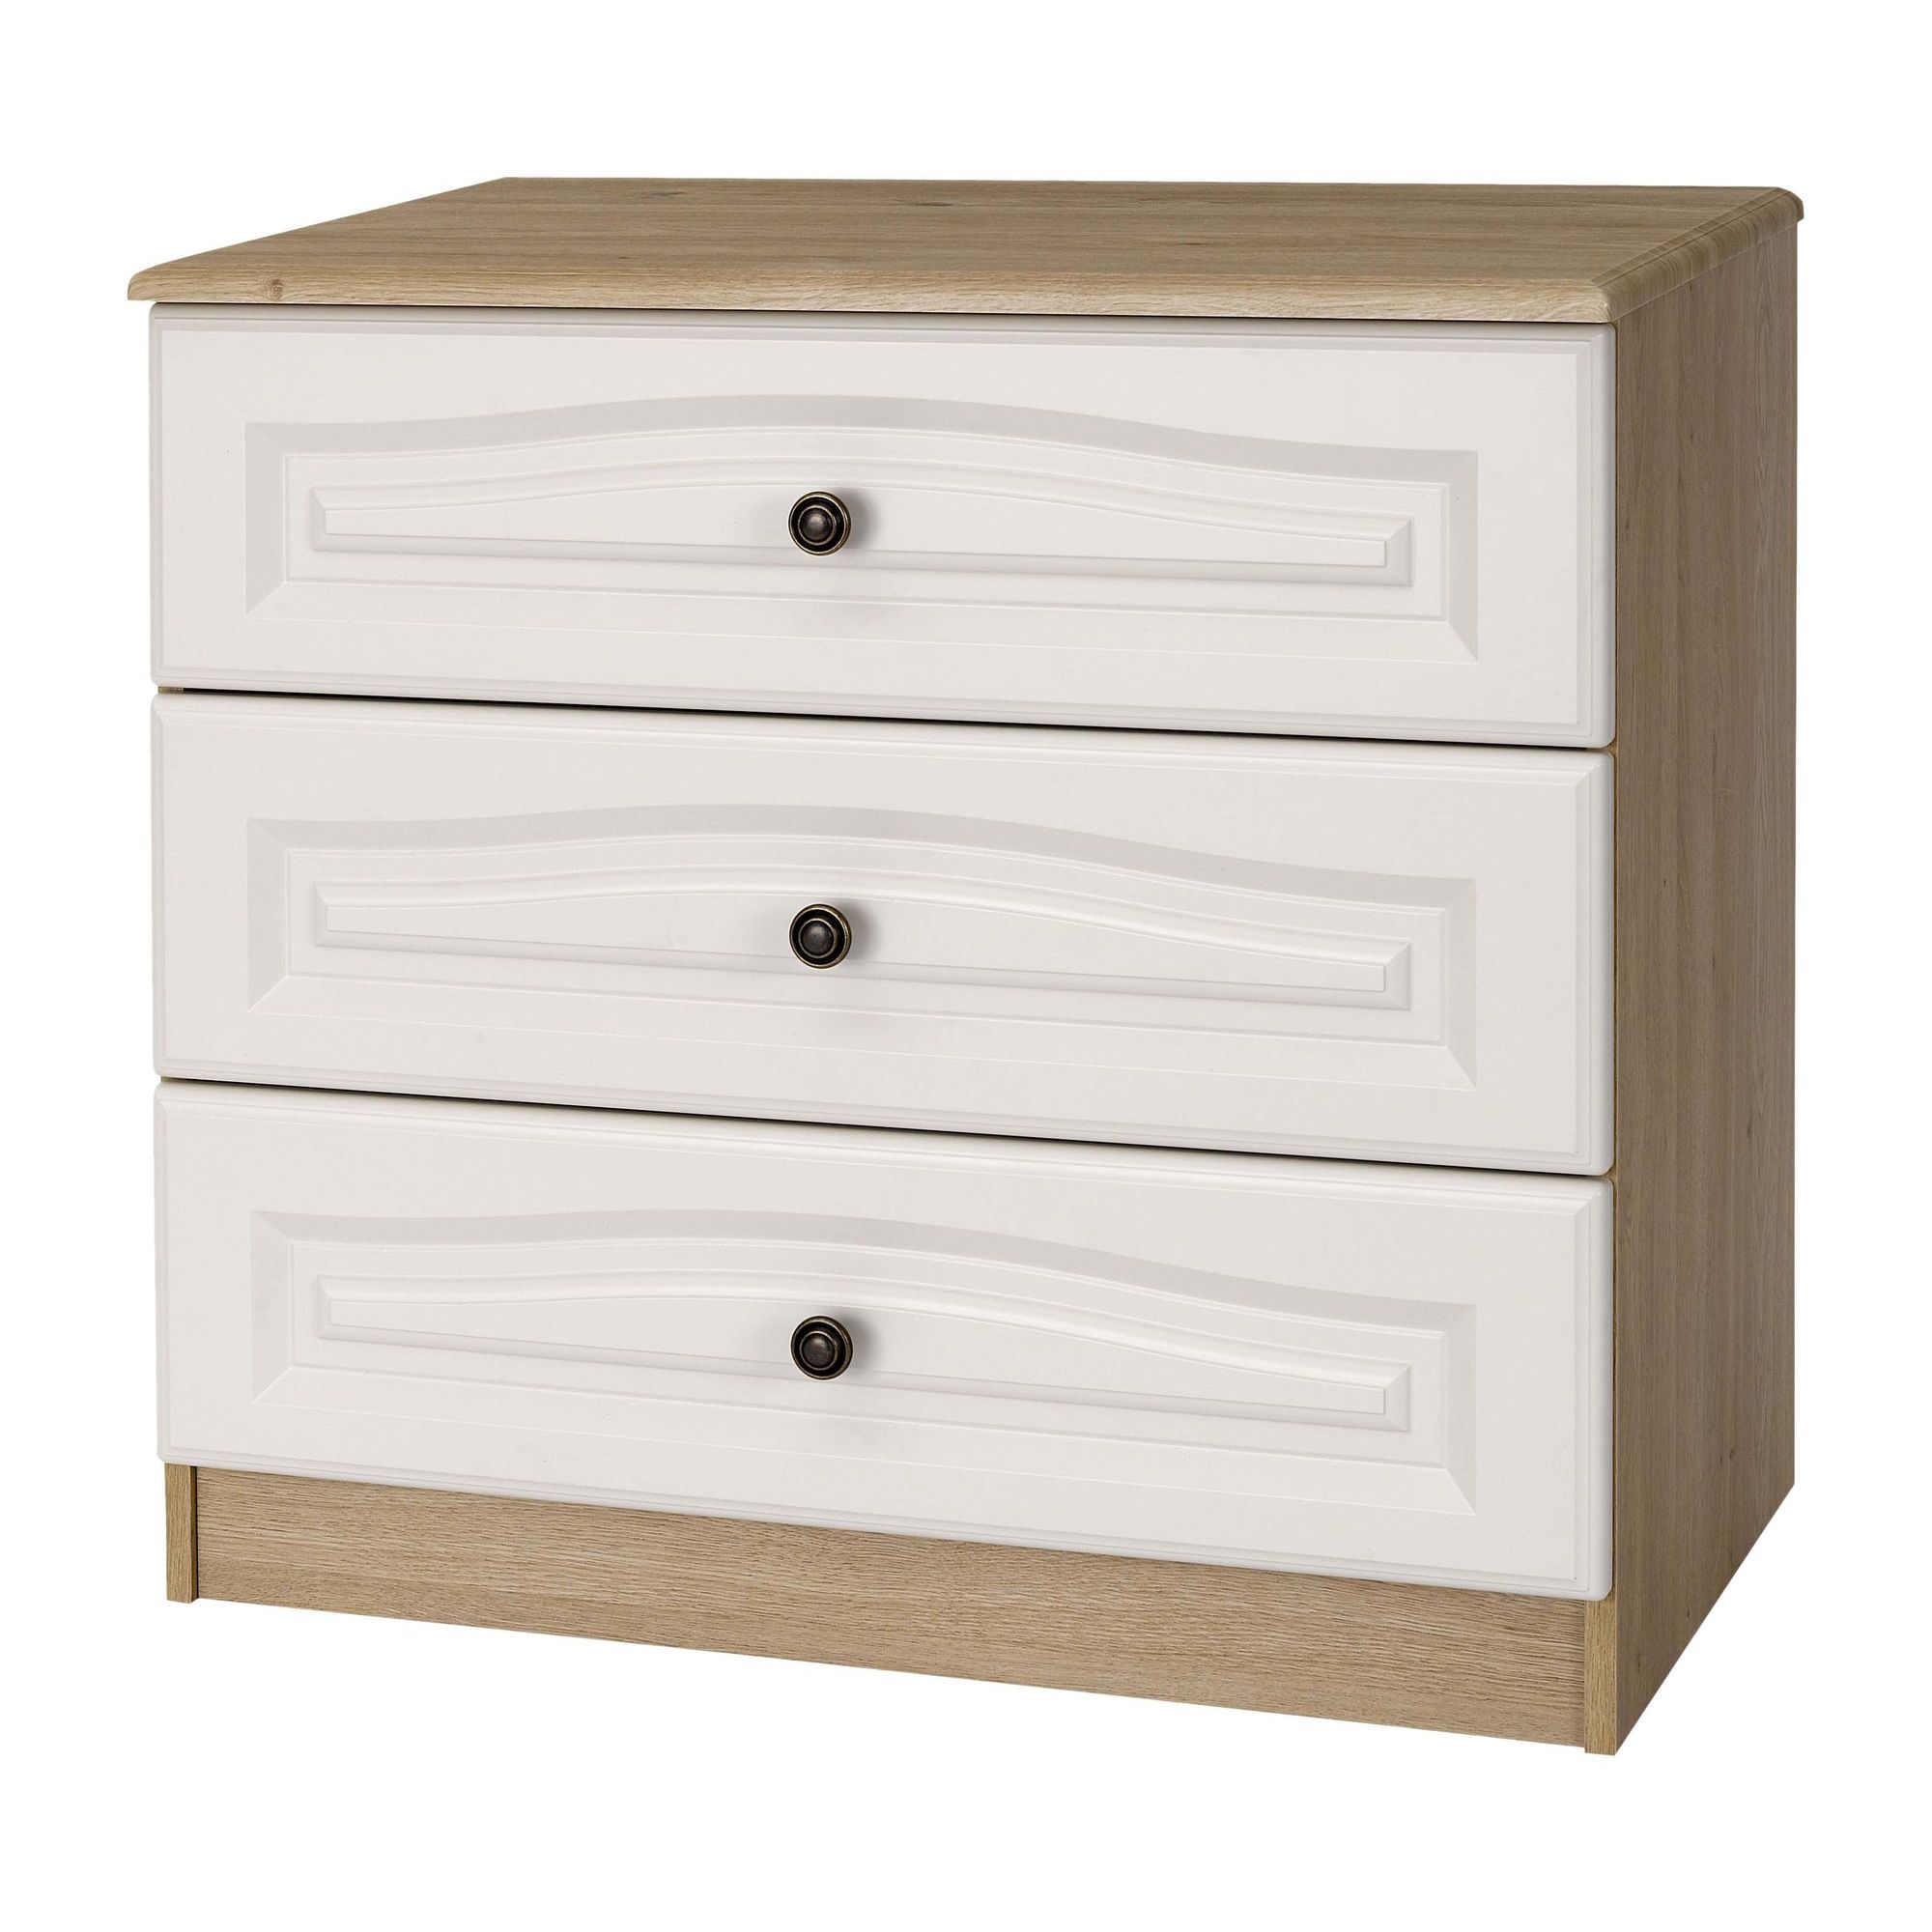 Alto Furniture Visualise Bordeaux Three Drawer Chest in Oak with Light Front at Tesco Direct